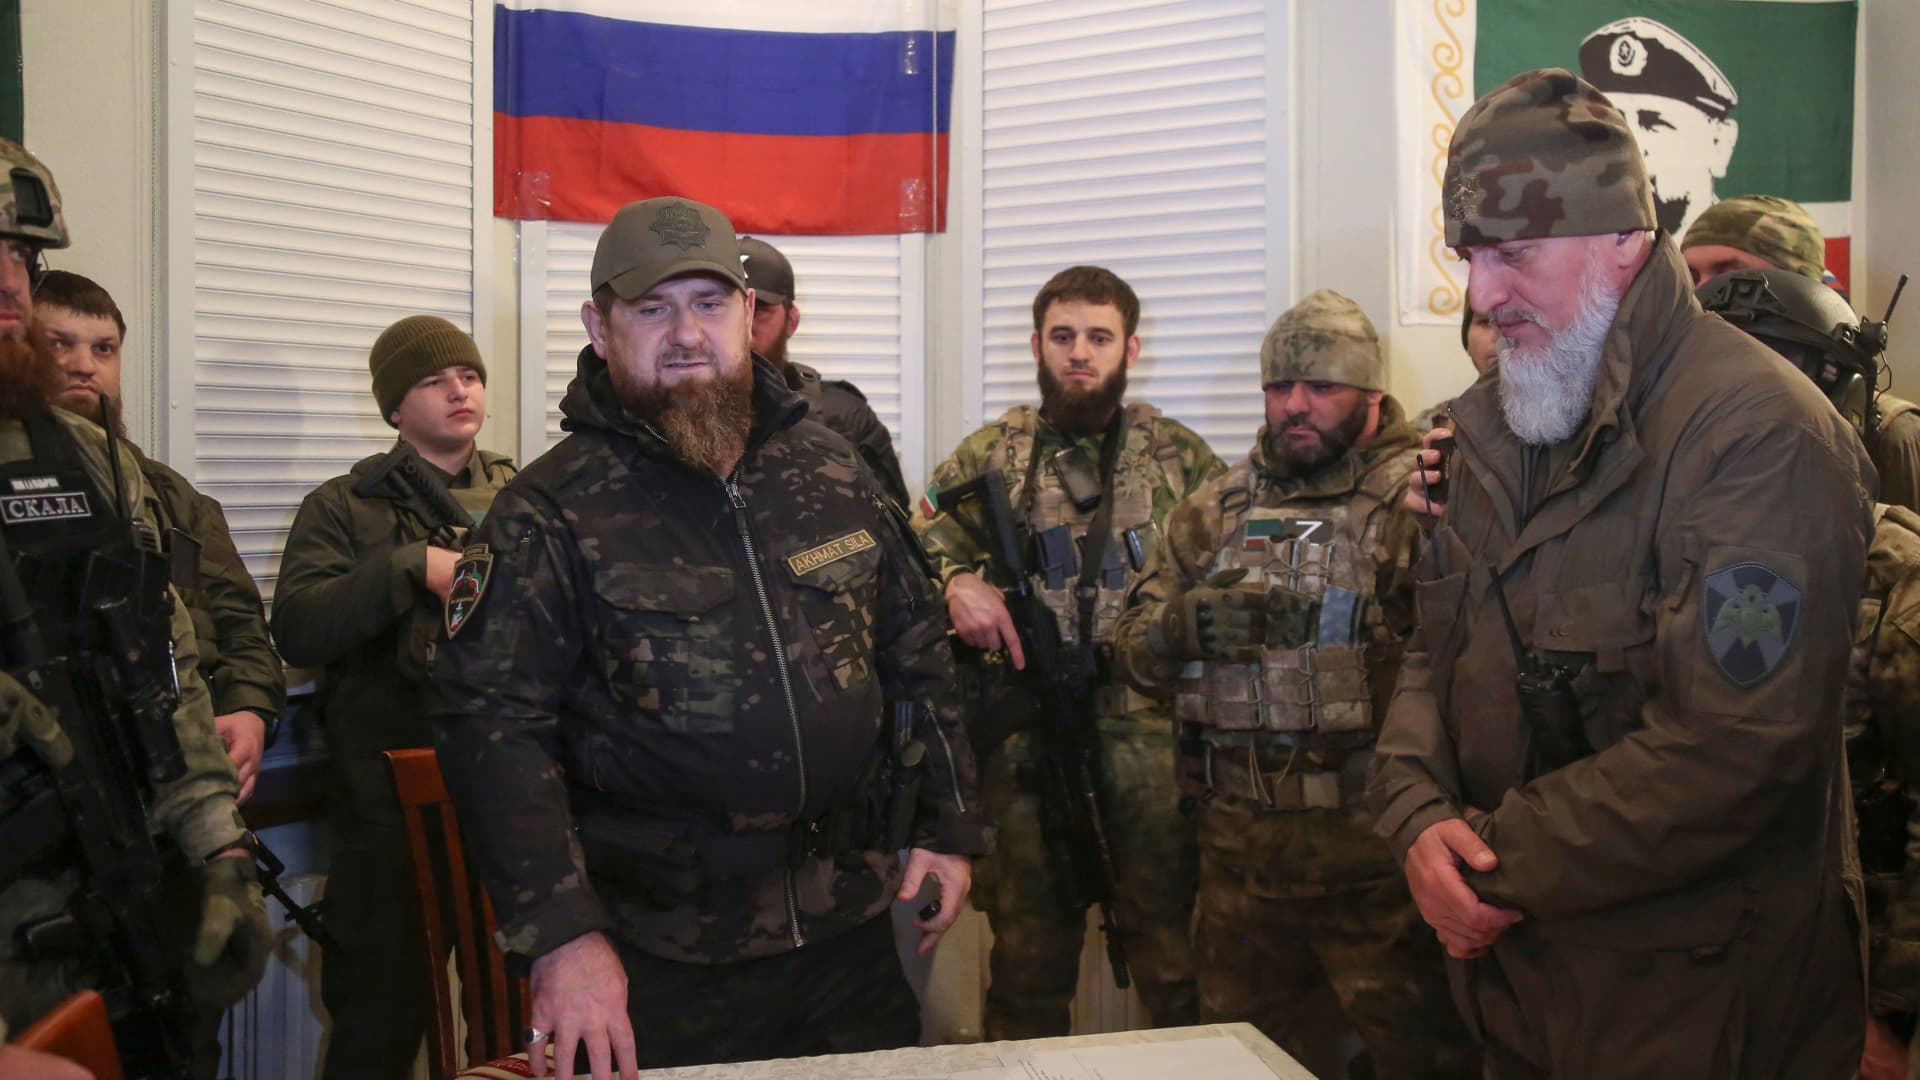 Ramzan Kadyrov, head of the Chechen Republic, at a meeting with commanders of Russia's 8th combined army of the Southern Military District and special forces units at an operations center in the city of Mariupol, Ukraine, on March 28, 2022.